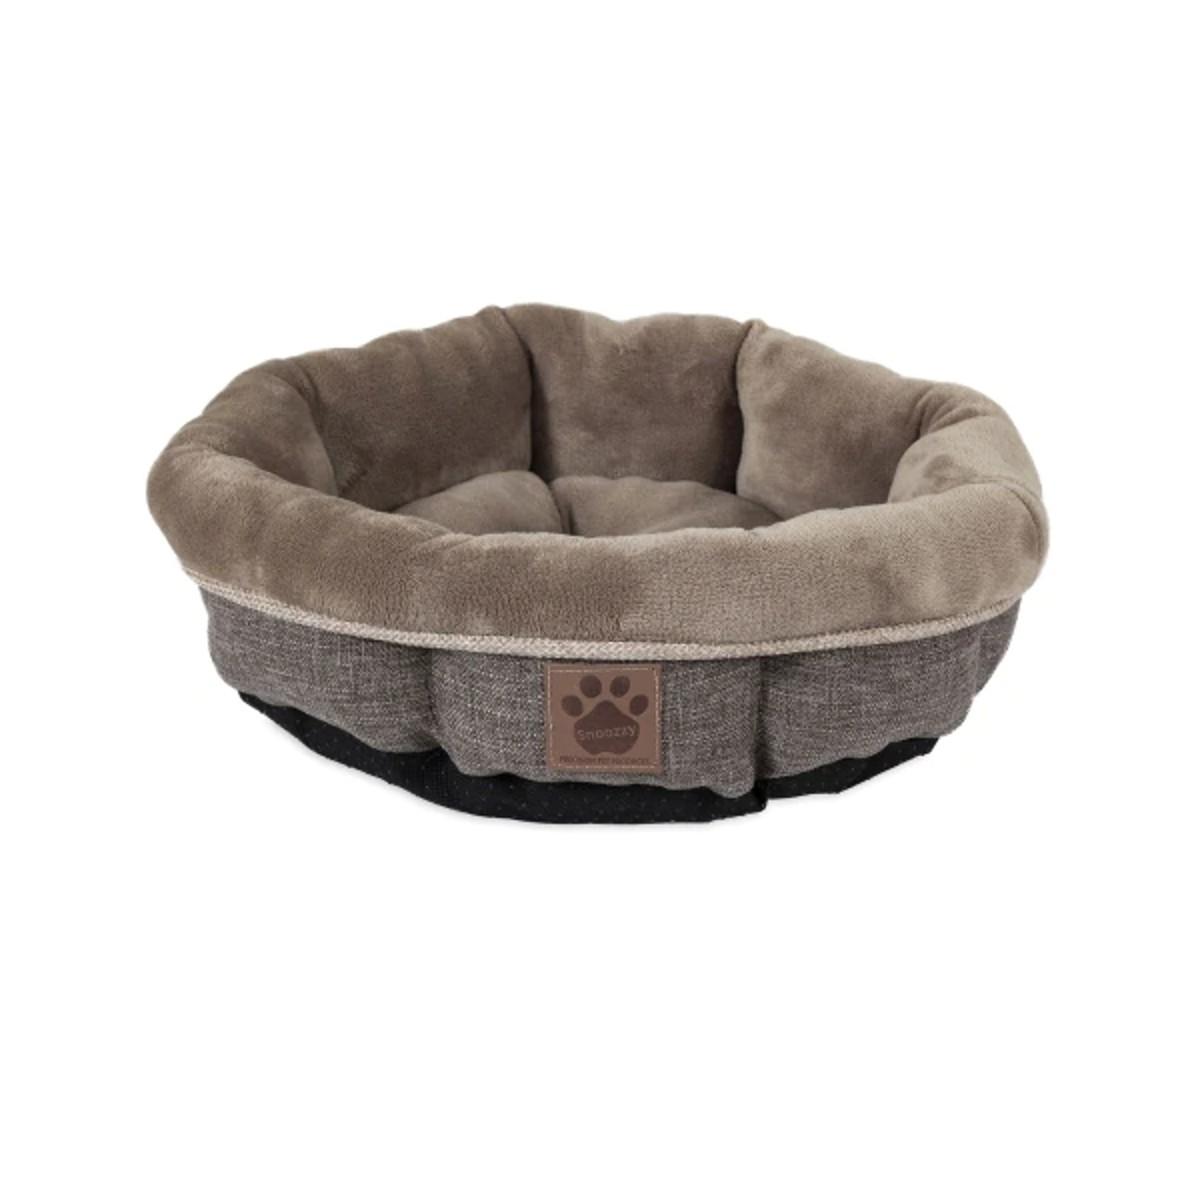 SnooZZy Rustic Elegance Shearling Round Dog Bed - Brown